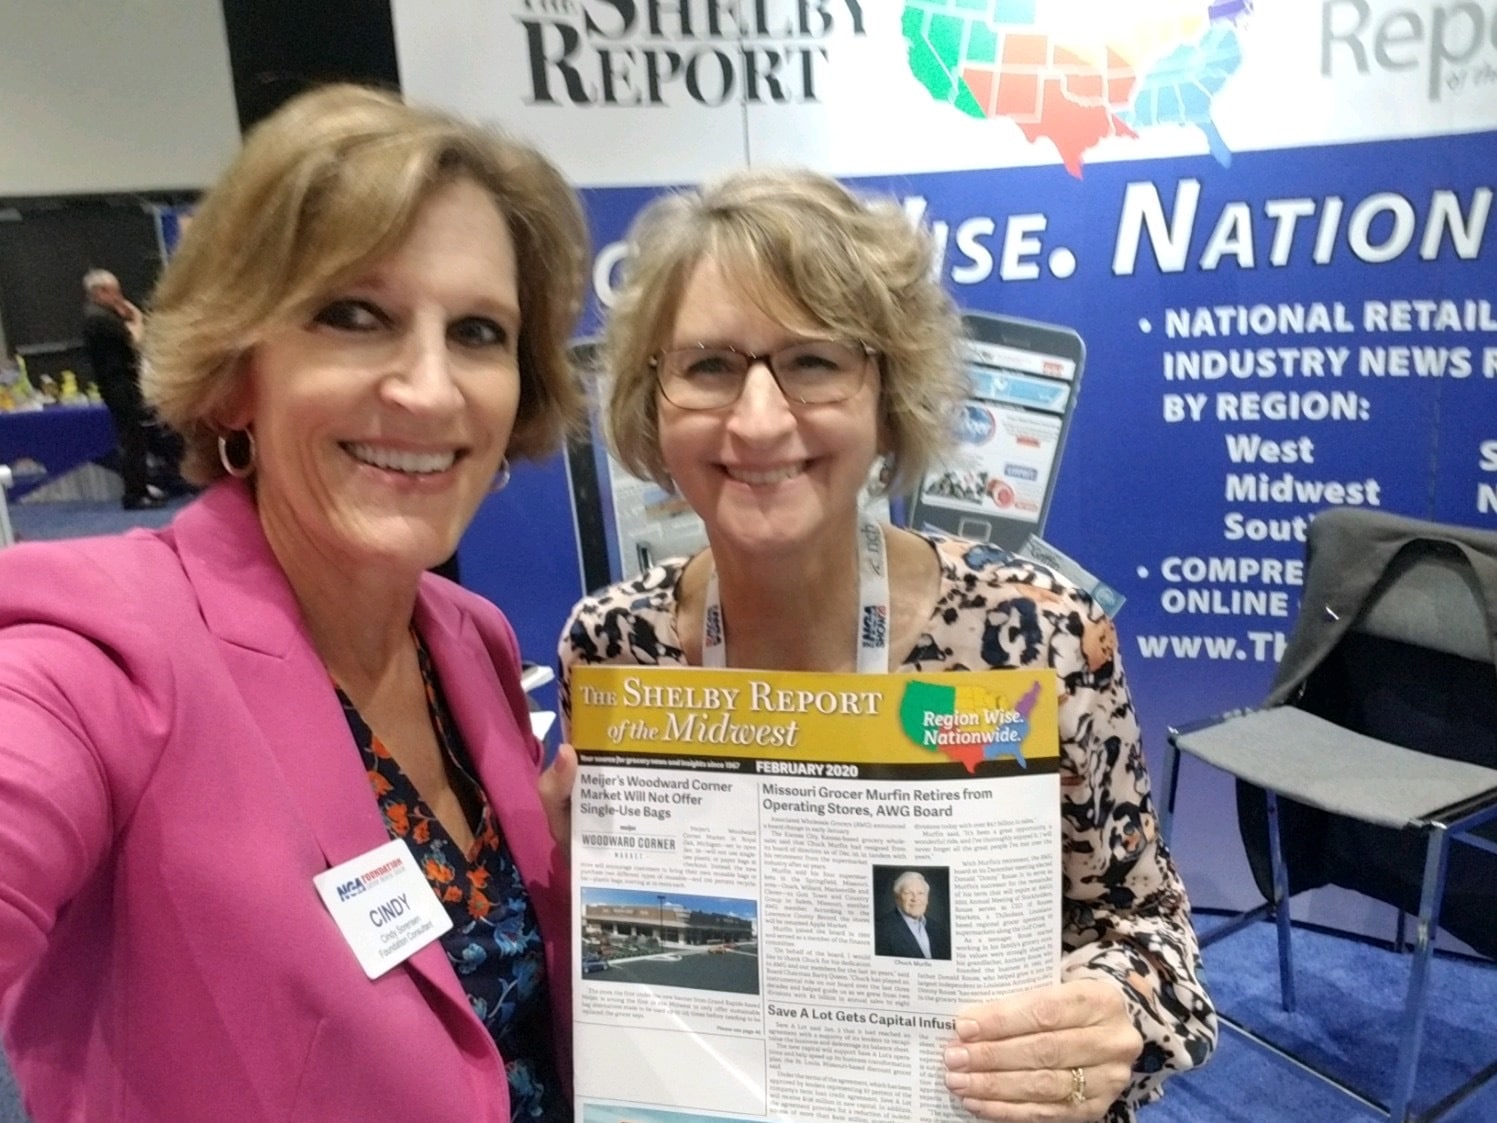 Cindy with Lorrie Griffith from The Shelby Report